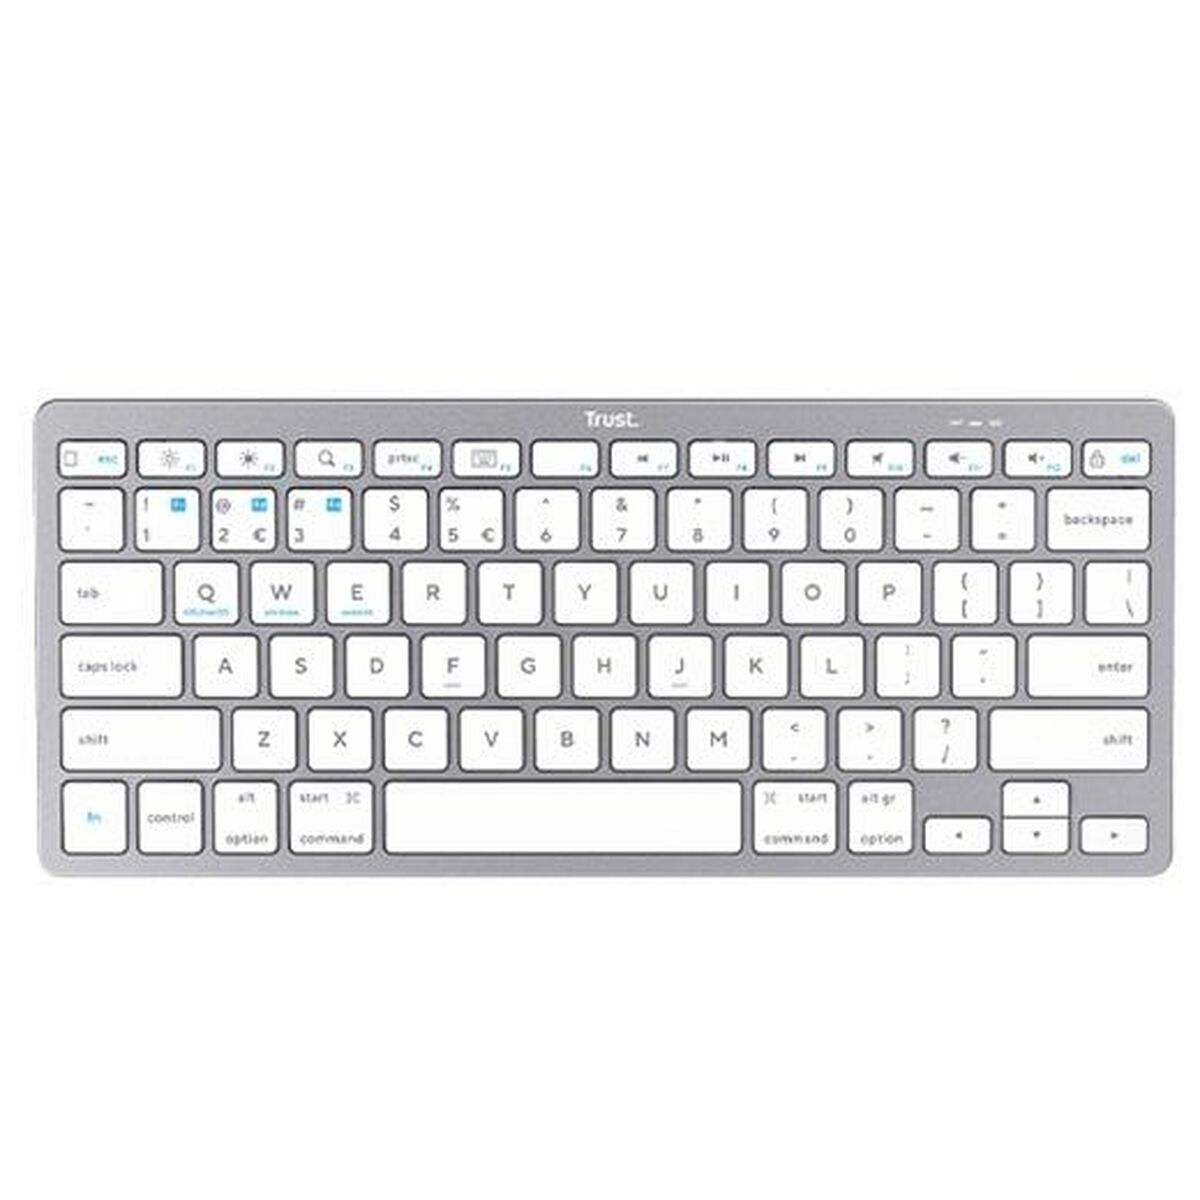 Keyboard Trust White Silver Spanish Qwerty, Trust, Computing, Accessories, keyboard-trust-white-silver-spanish-qwerty, Brand_Trust, category-reference-2609, category-reference-2642, category-reference-2646, category-reference-t-19685, category-reference-t-19908, category-reference-t-21353, category-reference-t-25628, computers / peripherals, Condition_NEW, office, Price_20 - 50, Teleworking, RiotNook